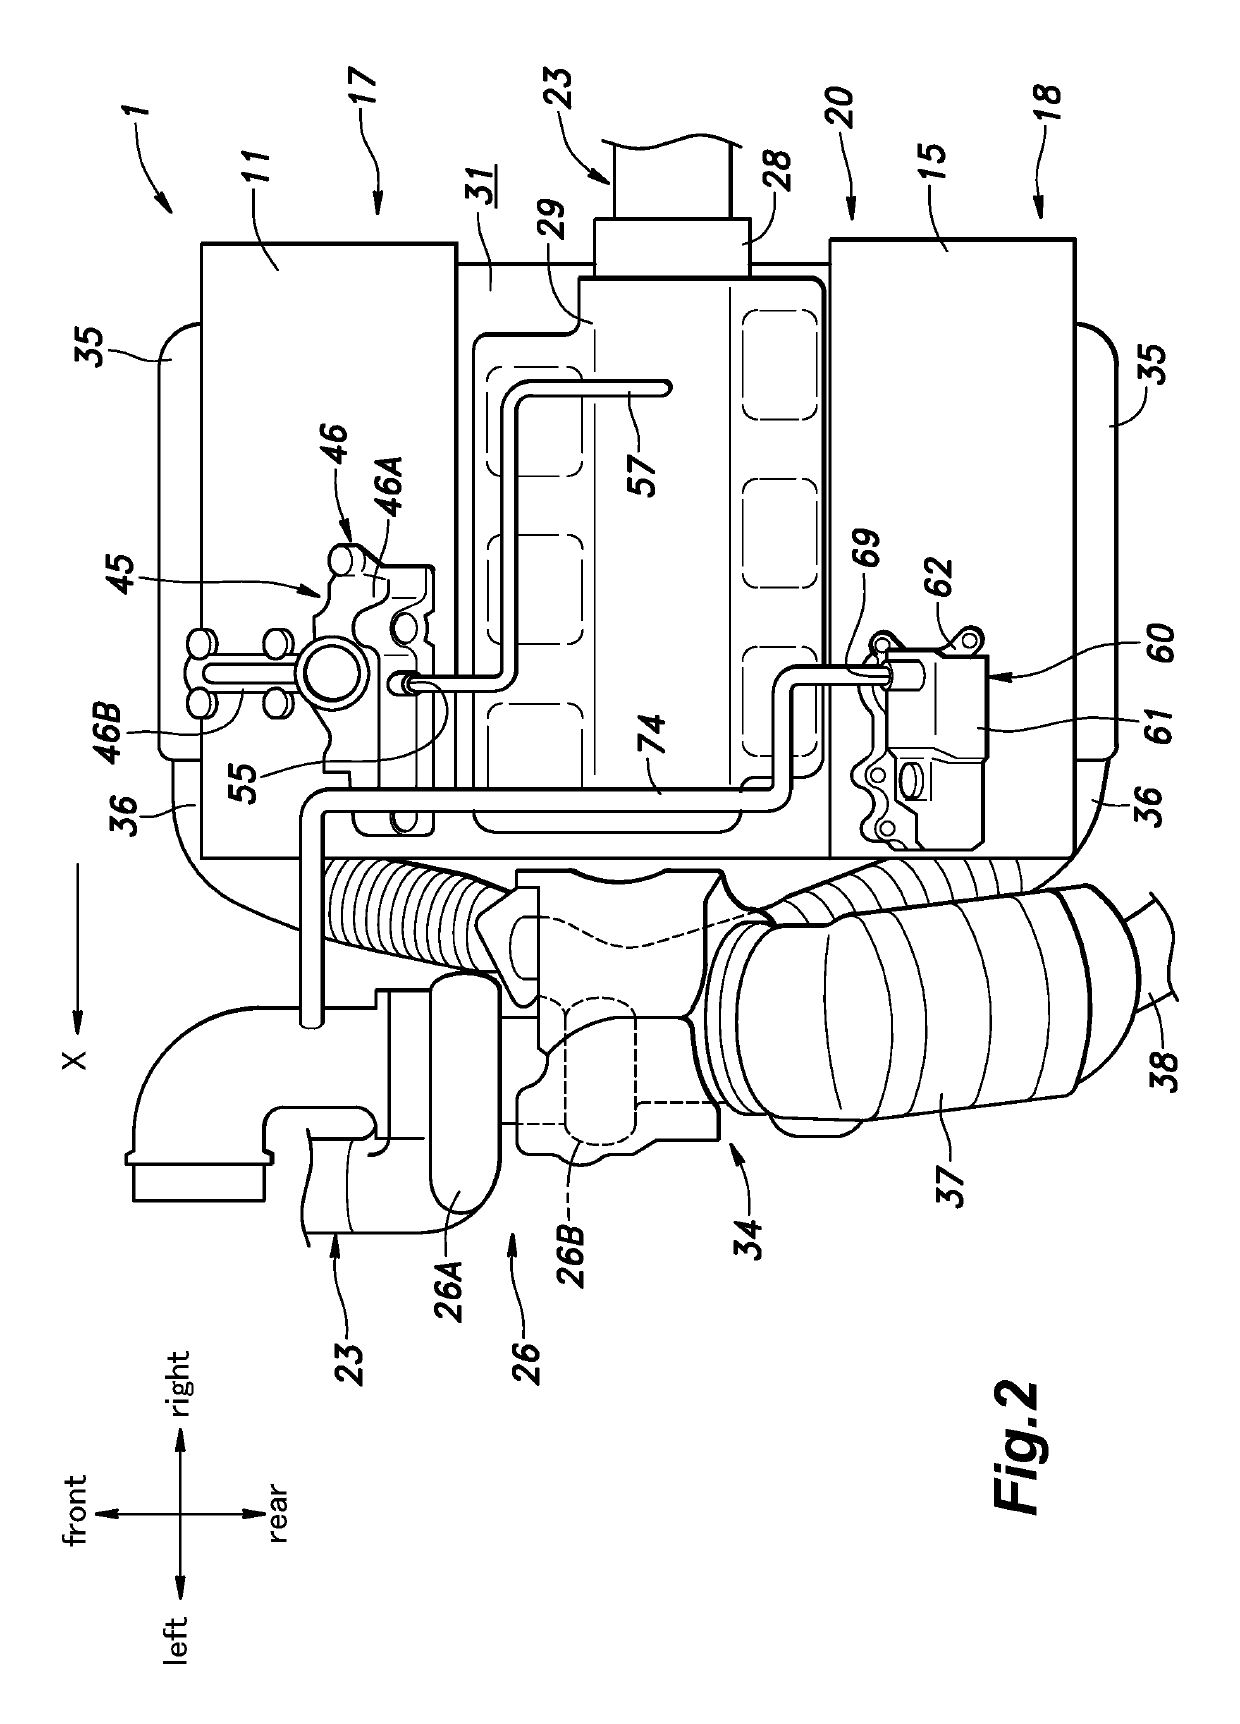 Internal combustion engine with gas-liquid separator for blowby gas